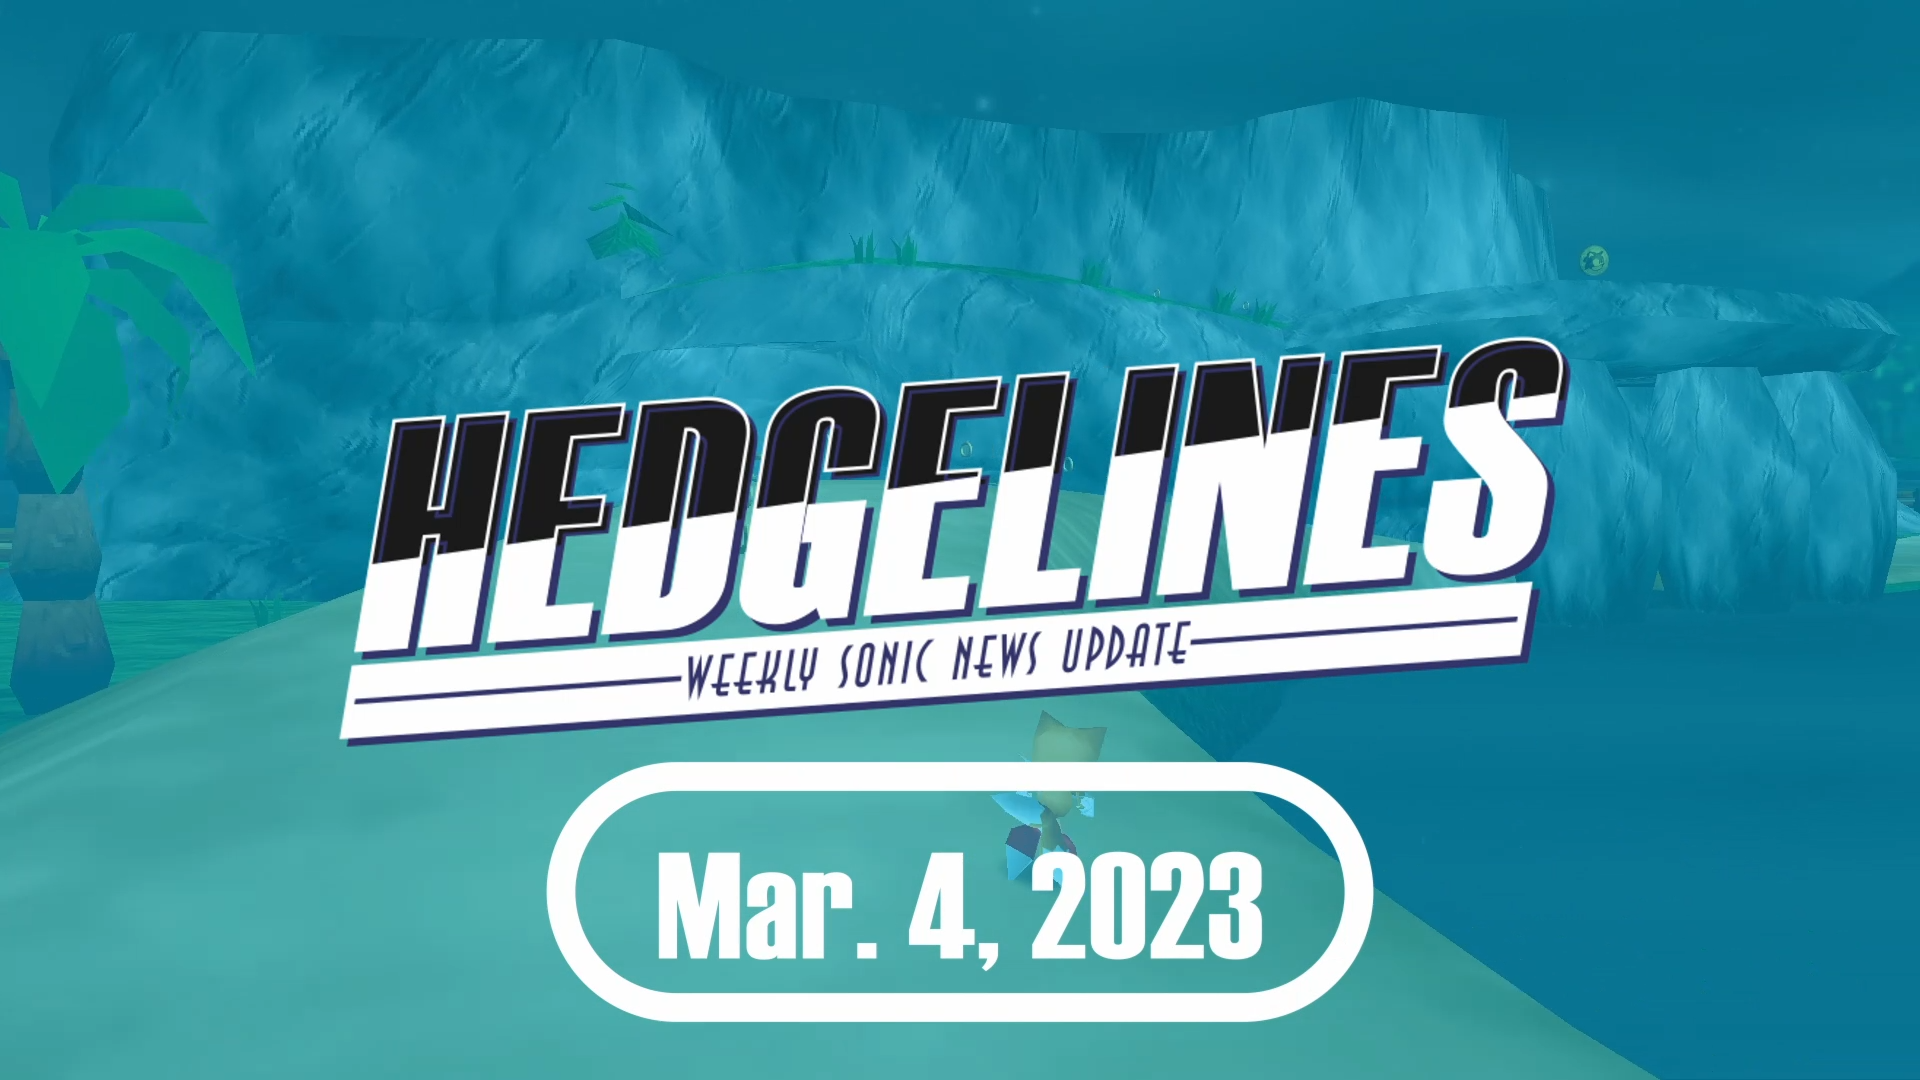 More information about "HedgeLines - Weekly News Recap - Mar. 4, 2023"